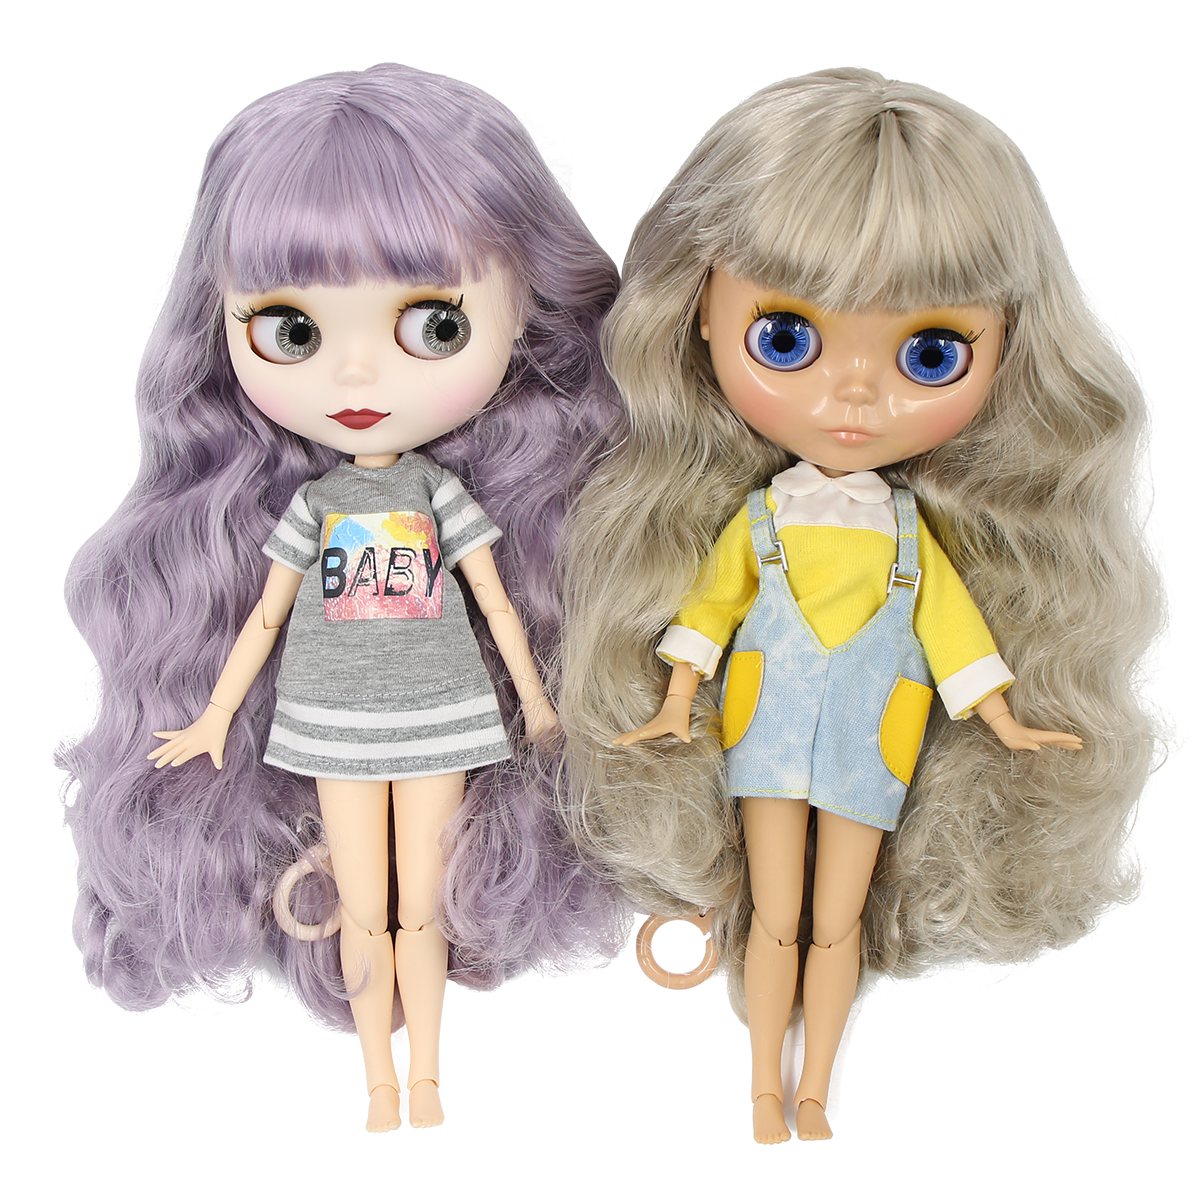 ICY DBS Blyth Doll 1/6 BJD Joint Body White Skin Tan Skin Dark Skin Matte Face Nude Doll 30cm Anime Toy Girls Gift  BX1310 white matte face / 30cm height doll Official JT Merch